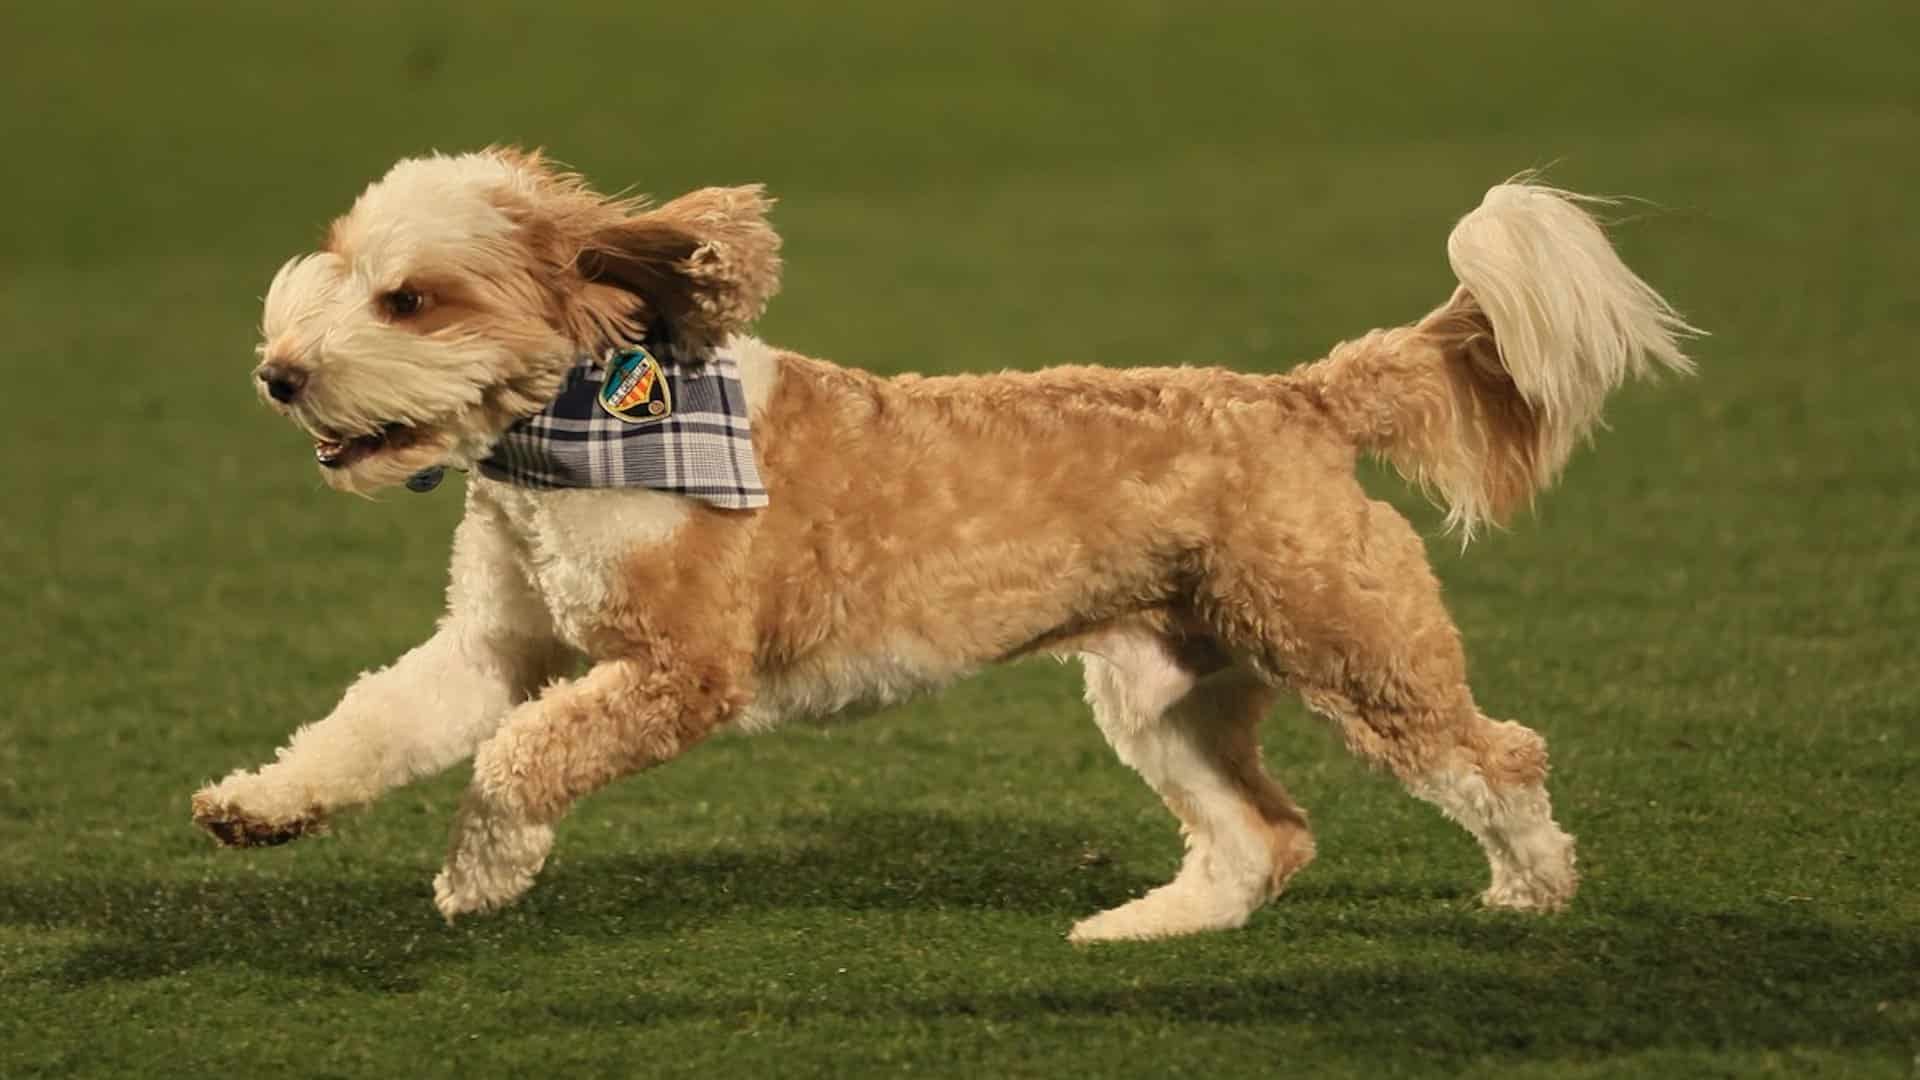 A photo of the bernedoodle Oscar running across the pitch at Castellon, wearing a snazzy Castellon neckerchief